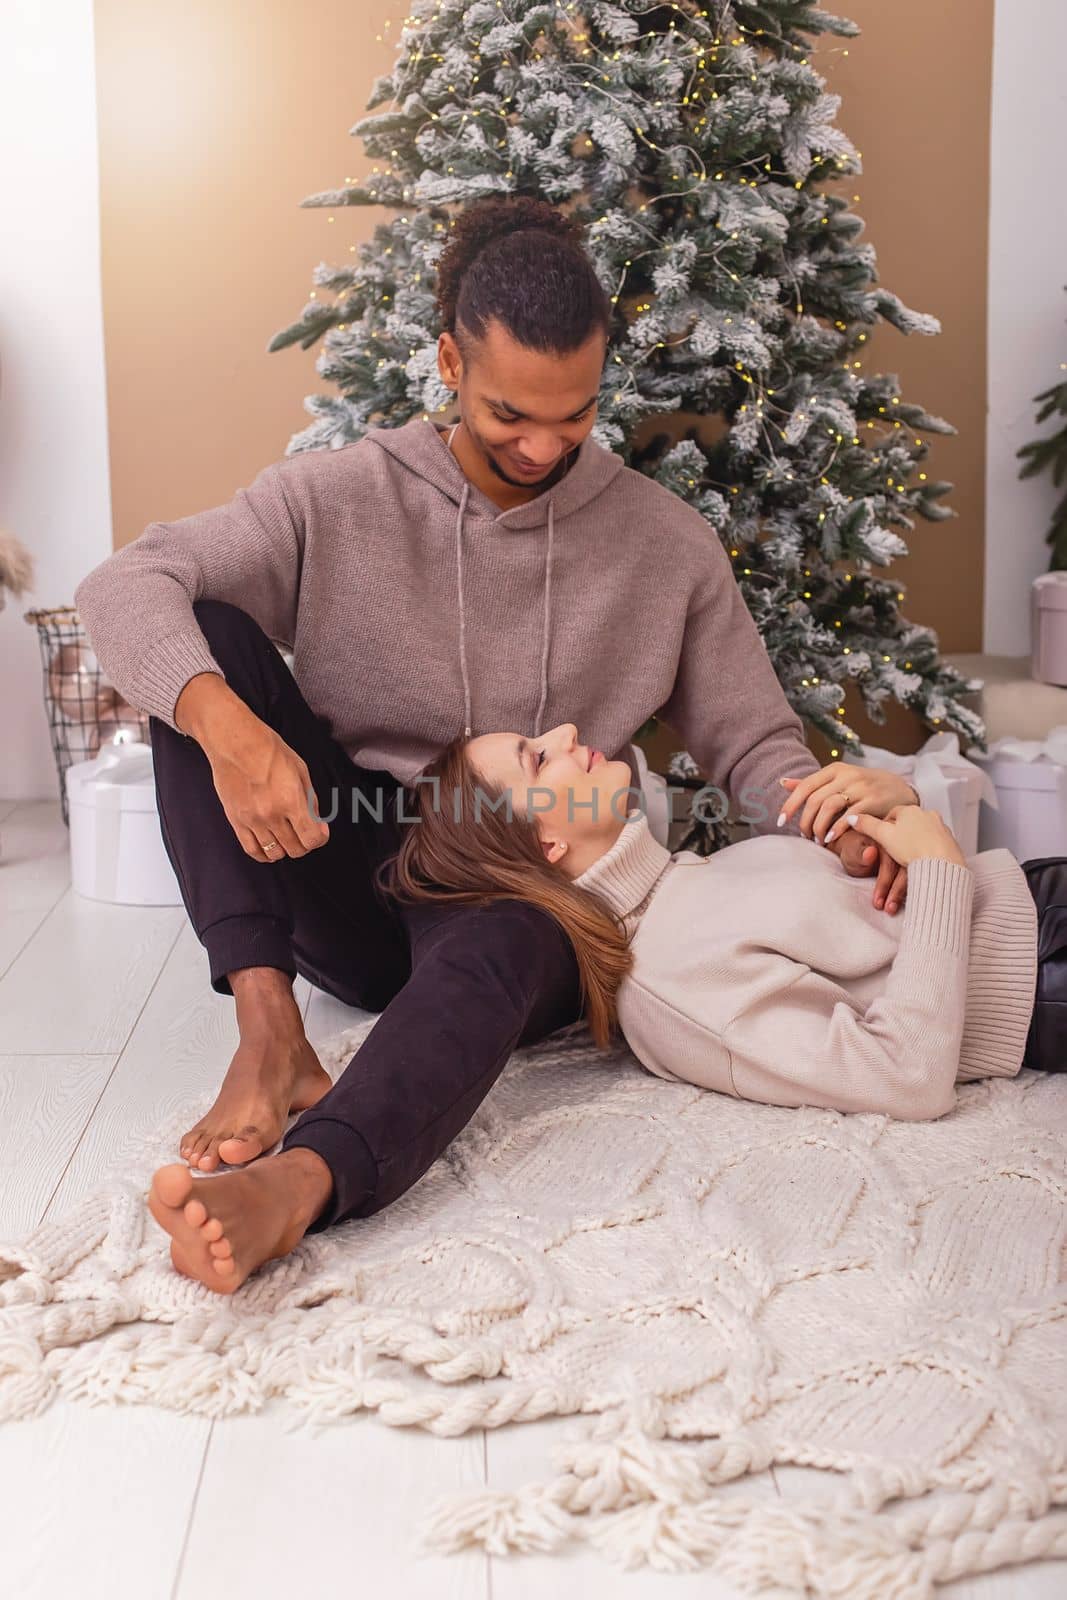 The girl, closing her eyes, lies on the lap of a stylish guy near the Christmas tree in the room.Vertical